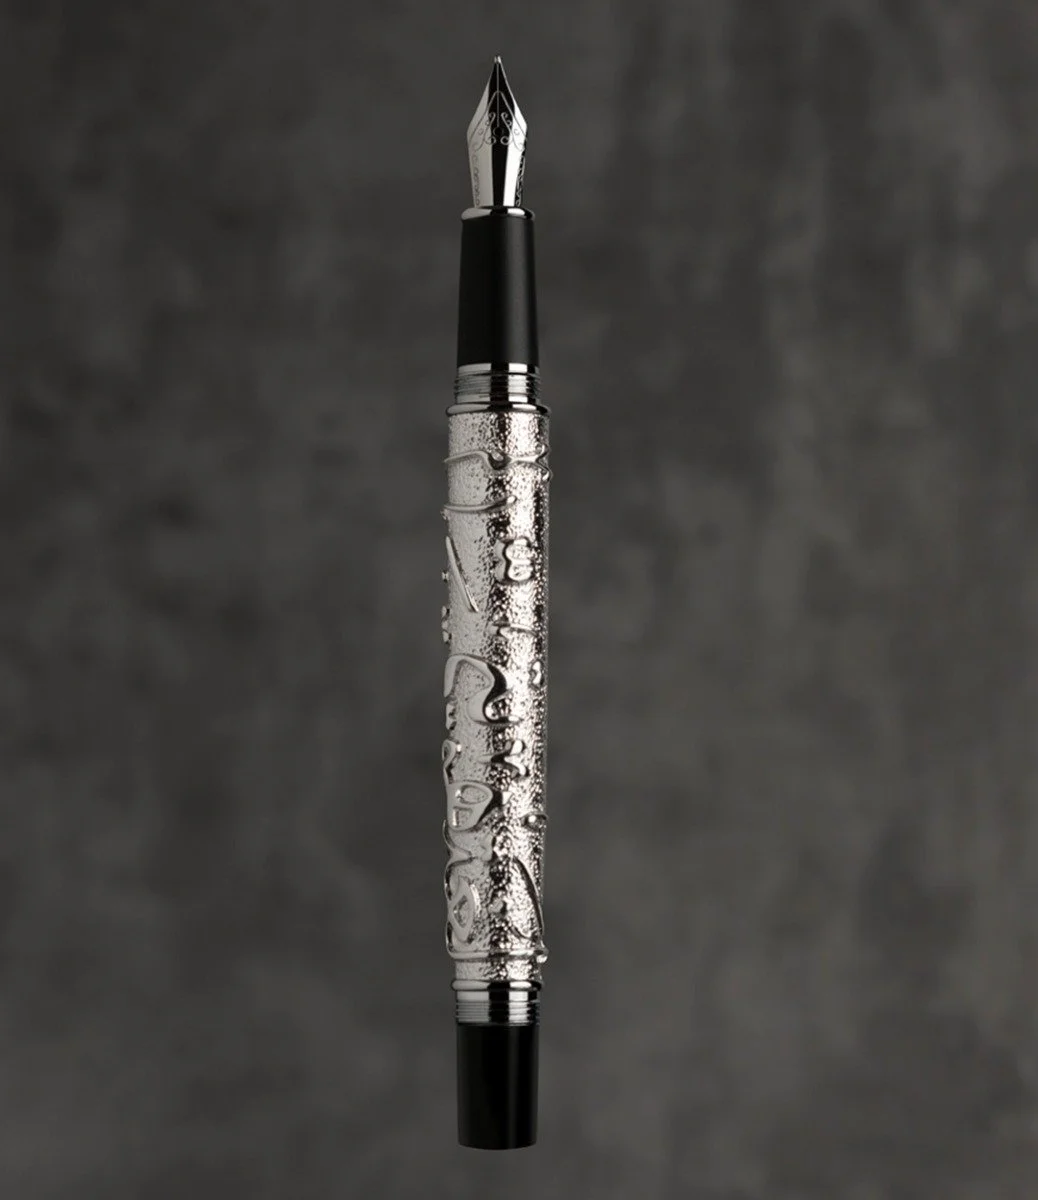 The engraved Dhad fountain pen with Thuluth calligraphy on the body of the pen stating "My language is my Identity"